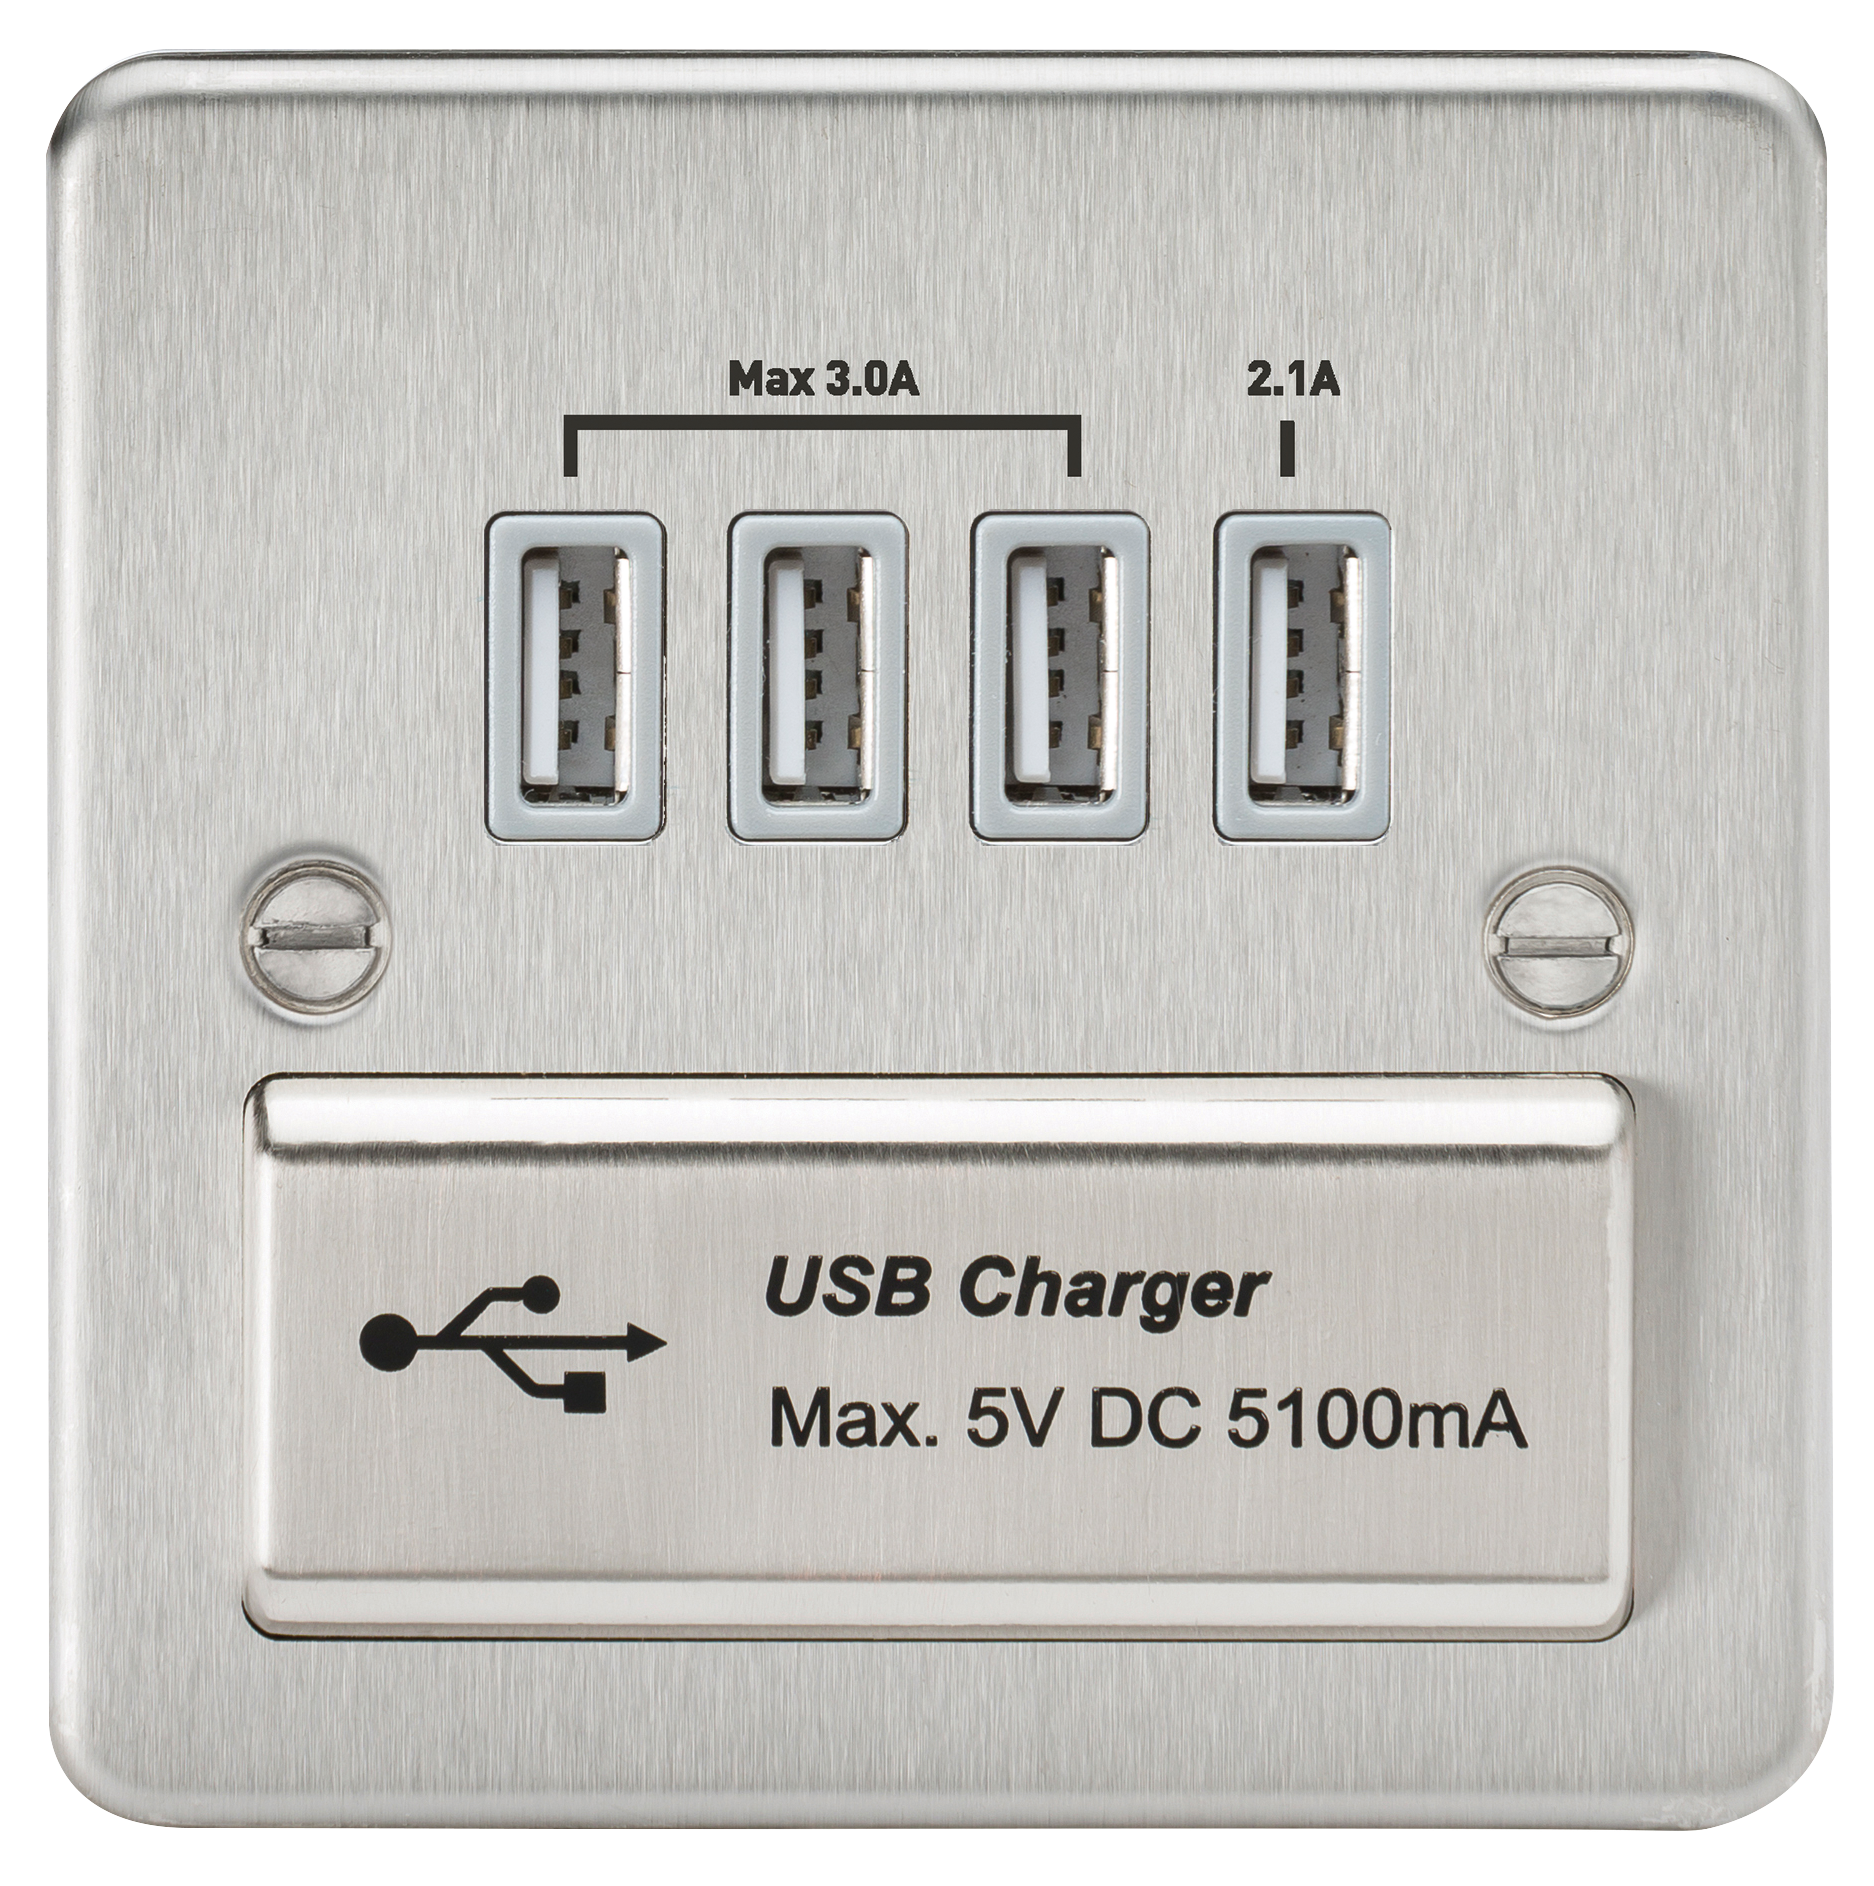 Flat Plate Quad USB Charger Outlet - Brushed Chrome With Grey Insert - FPQUADBCG 